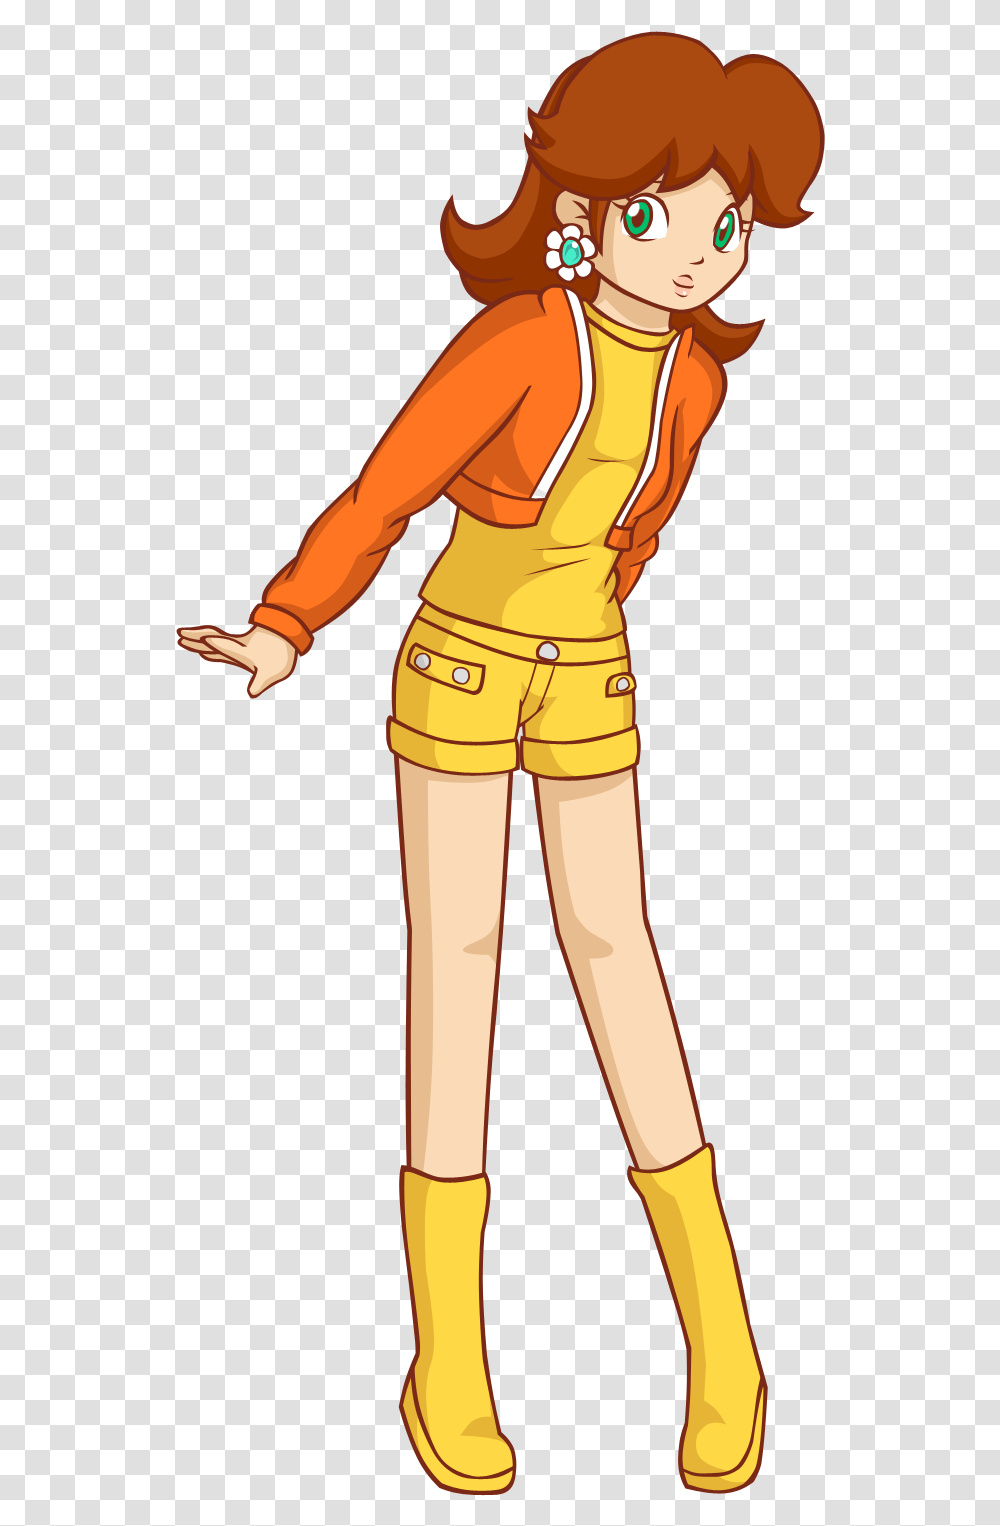 Daisies Drawing Princess Princess Peach Normal Clothes, Toy, Person, Human, Figurine Transparent Png